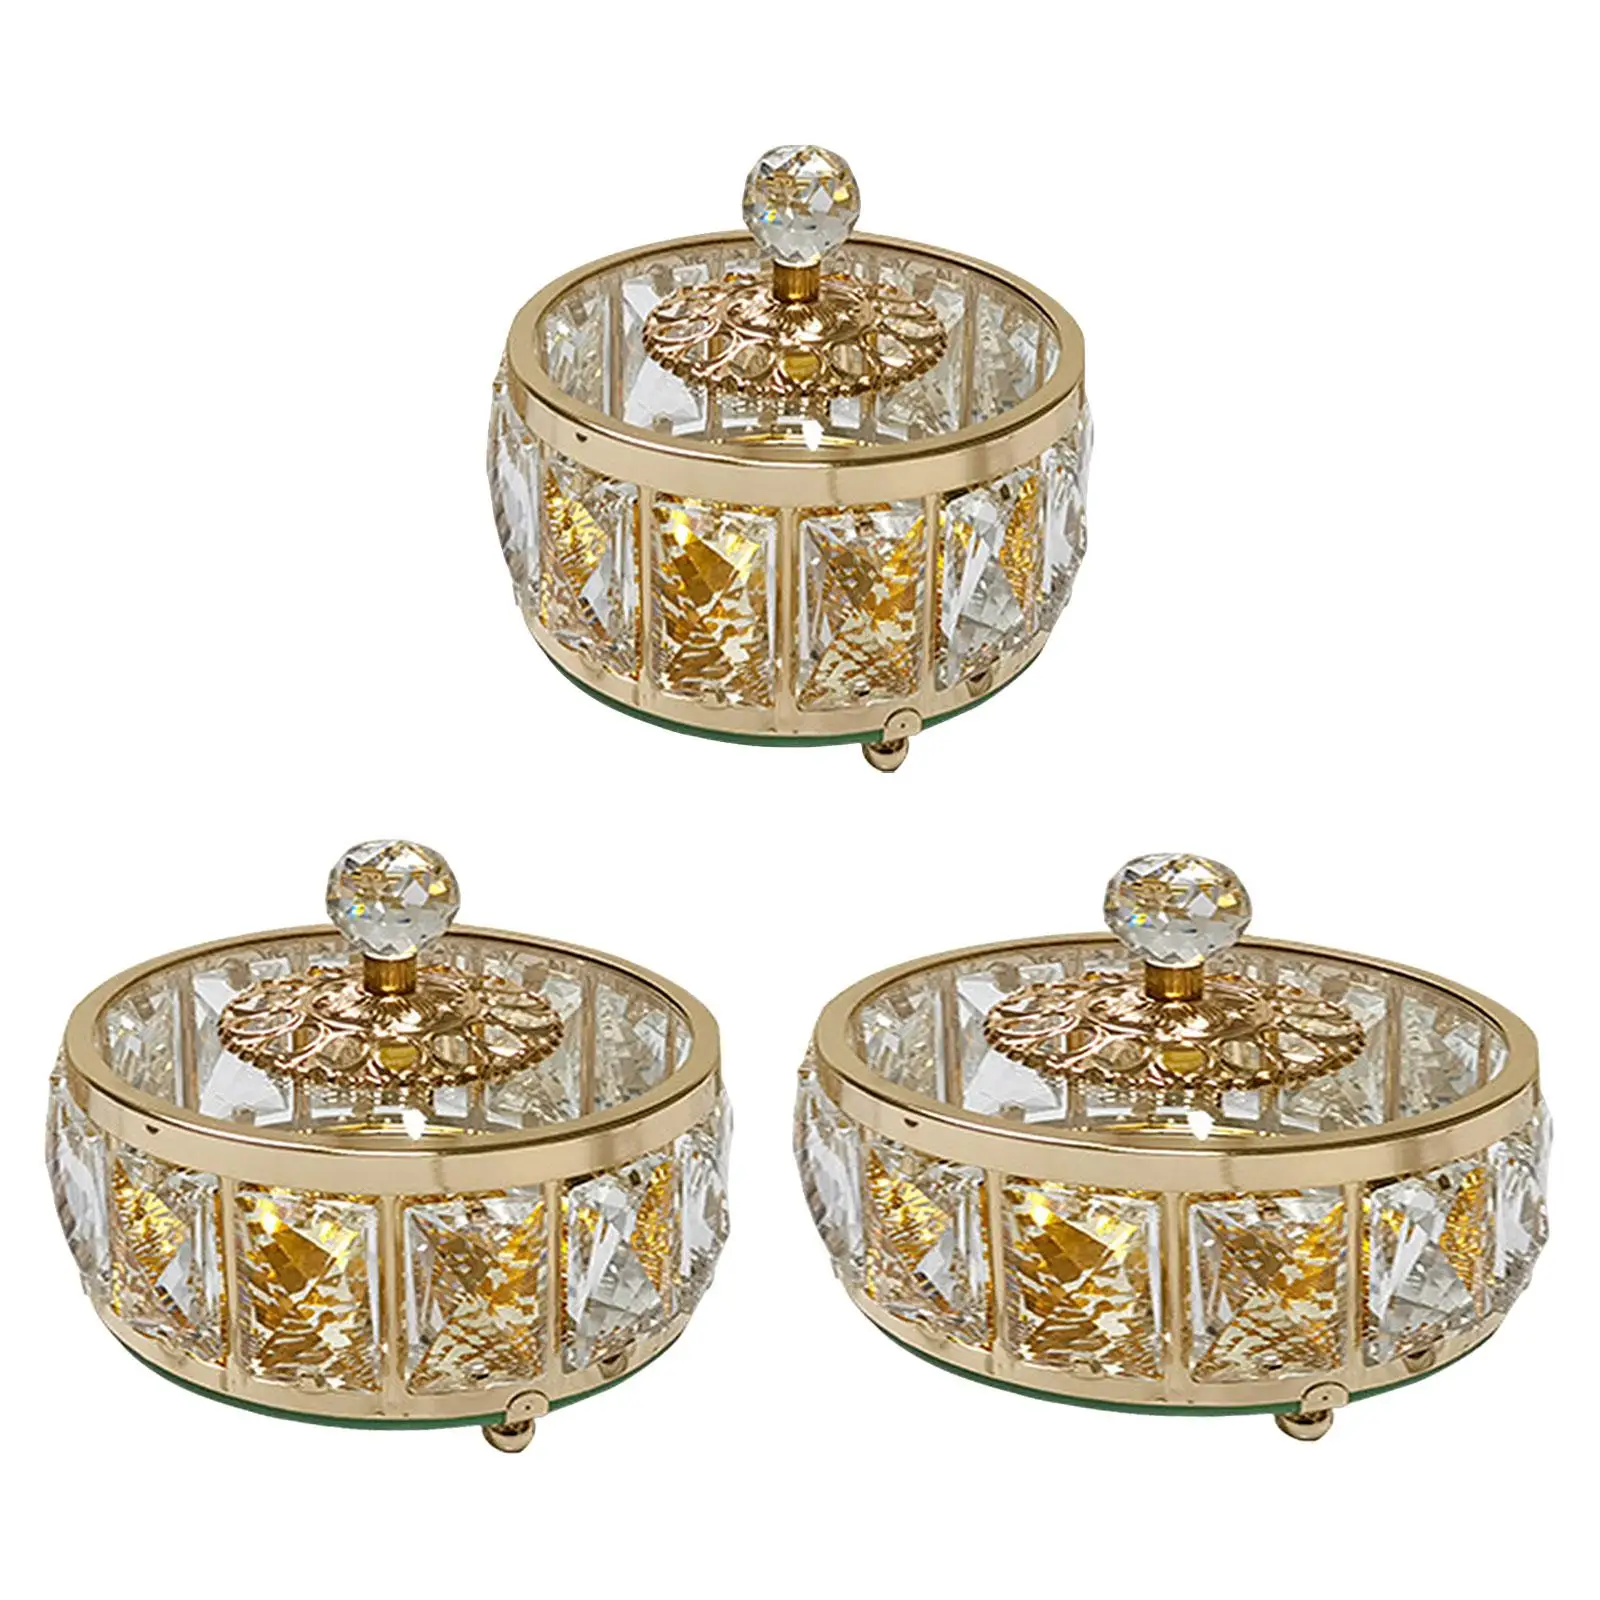 Nuts Storage Platter Tray Round European Delicate Home Ornament Jewelry Box Candy Jar for Party Holiday Family Dinner Home Decor